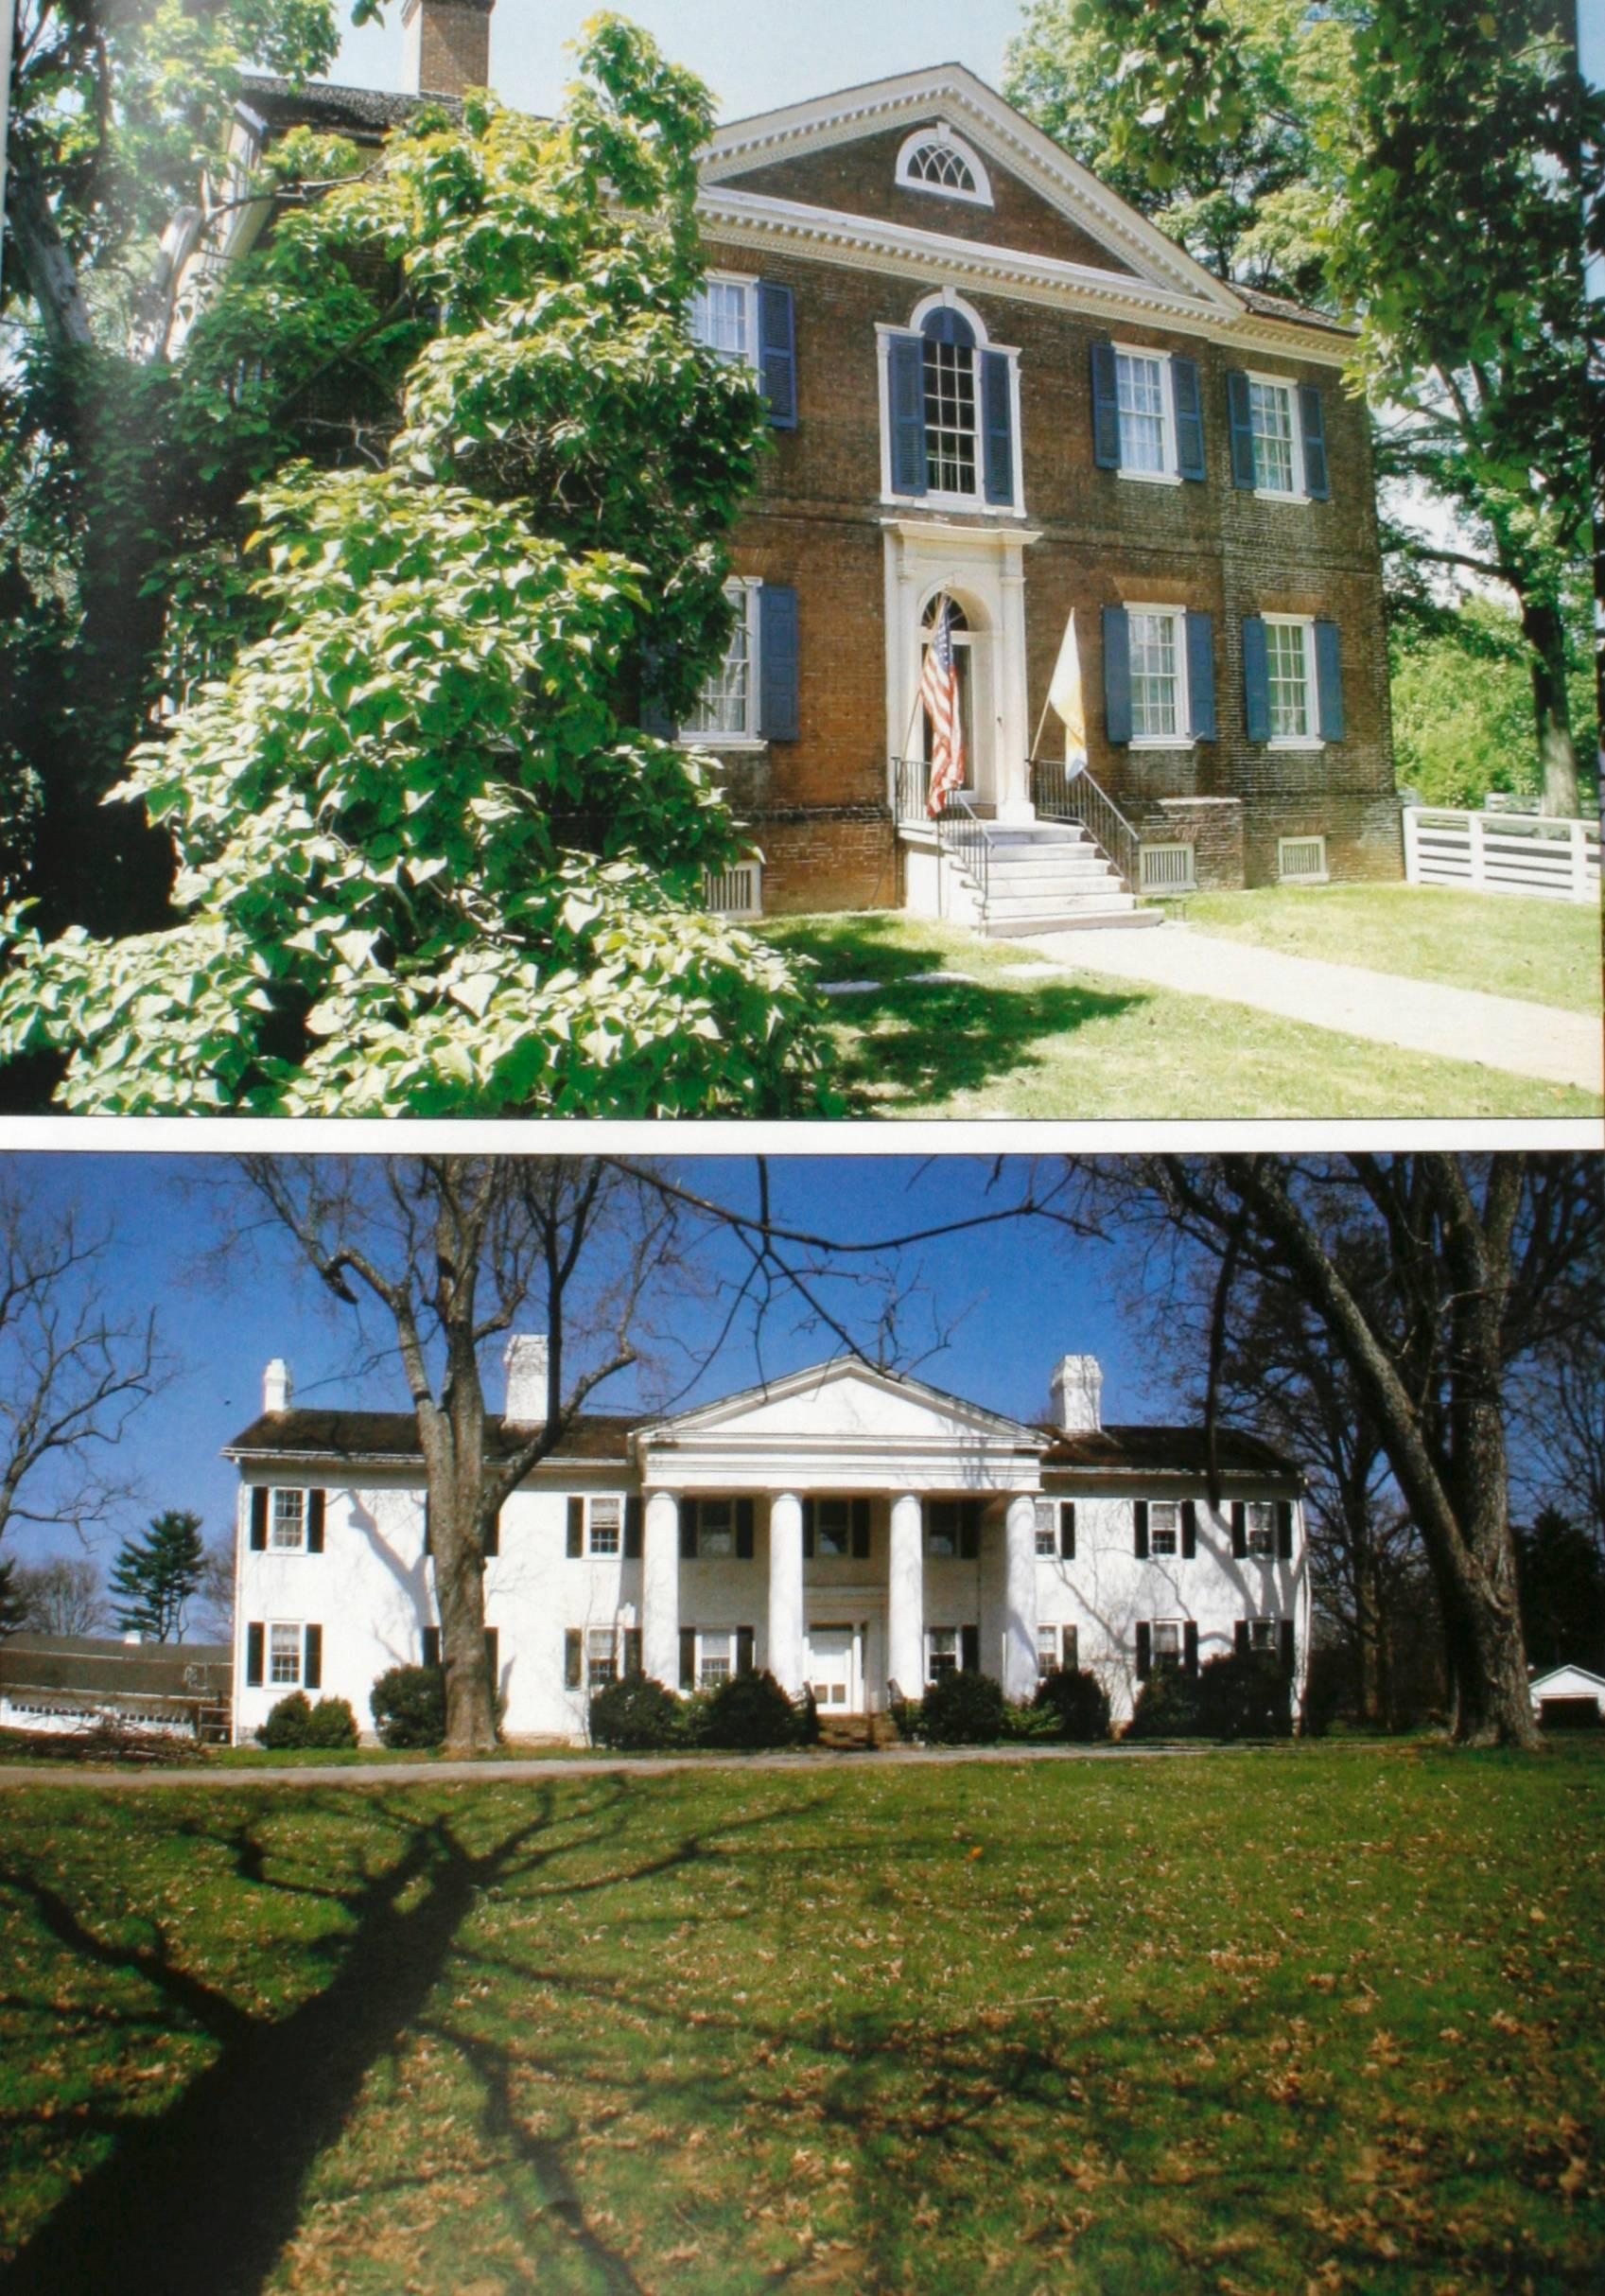 Grand Homes of the South 8